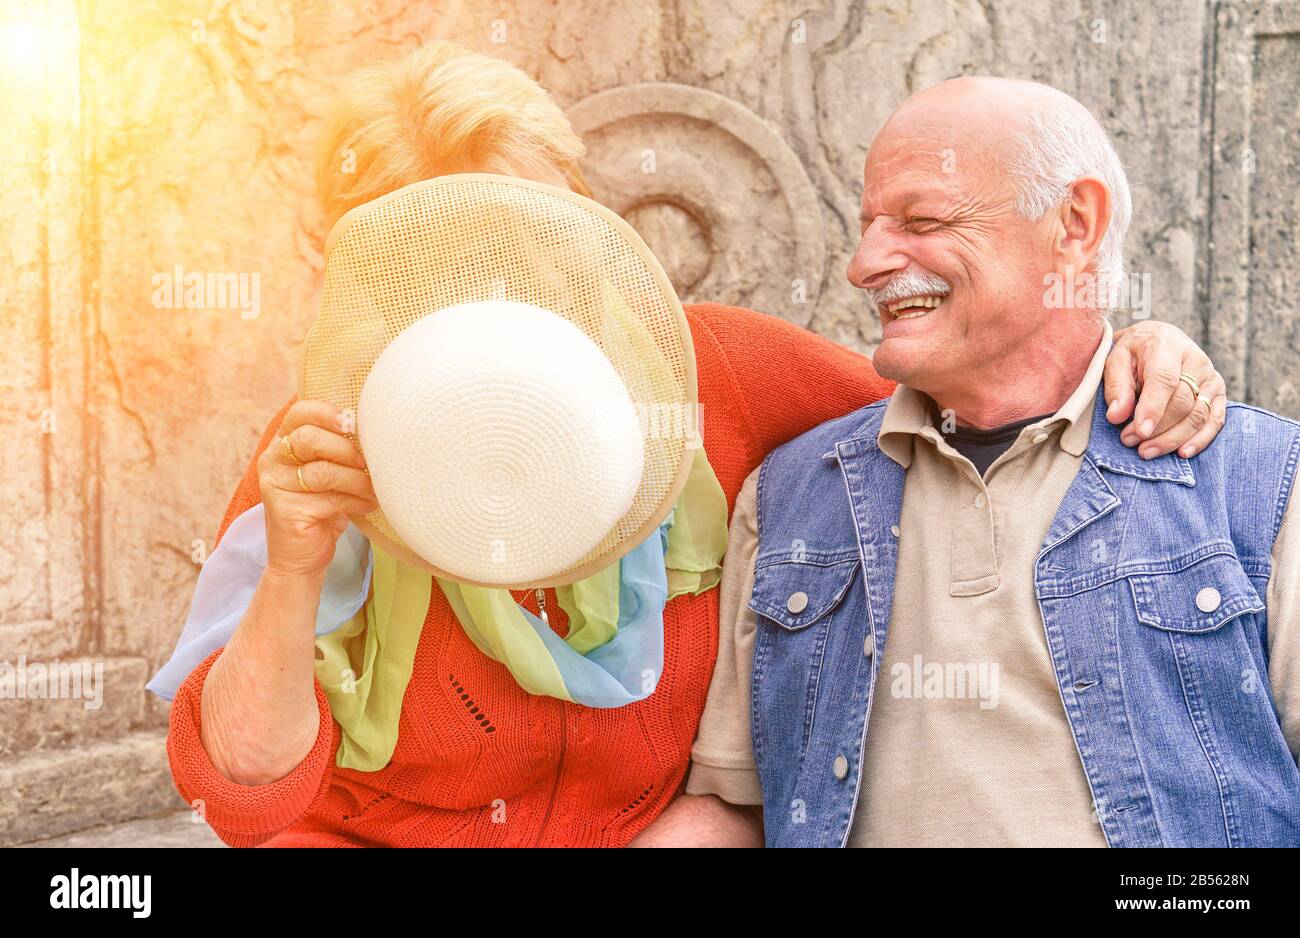 Senior couple having fun while wife covering her face from sun with retro fashion hat - Joyful elderly active lifestyle in old town city contest - Lov Stock Photo